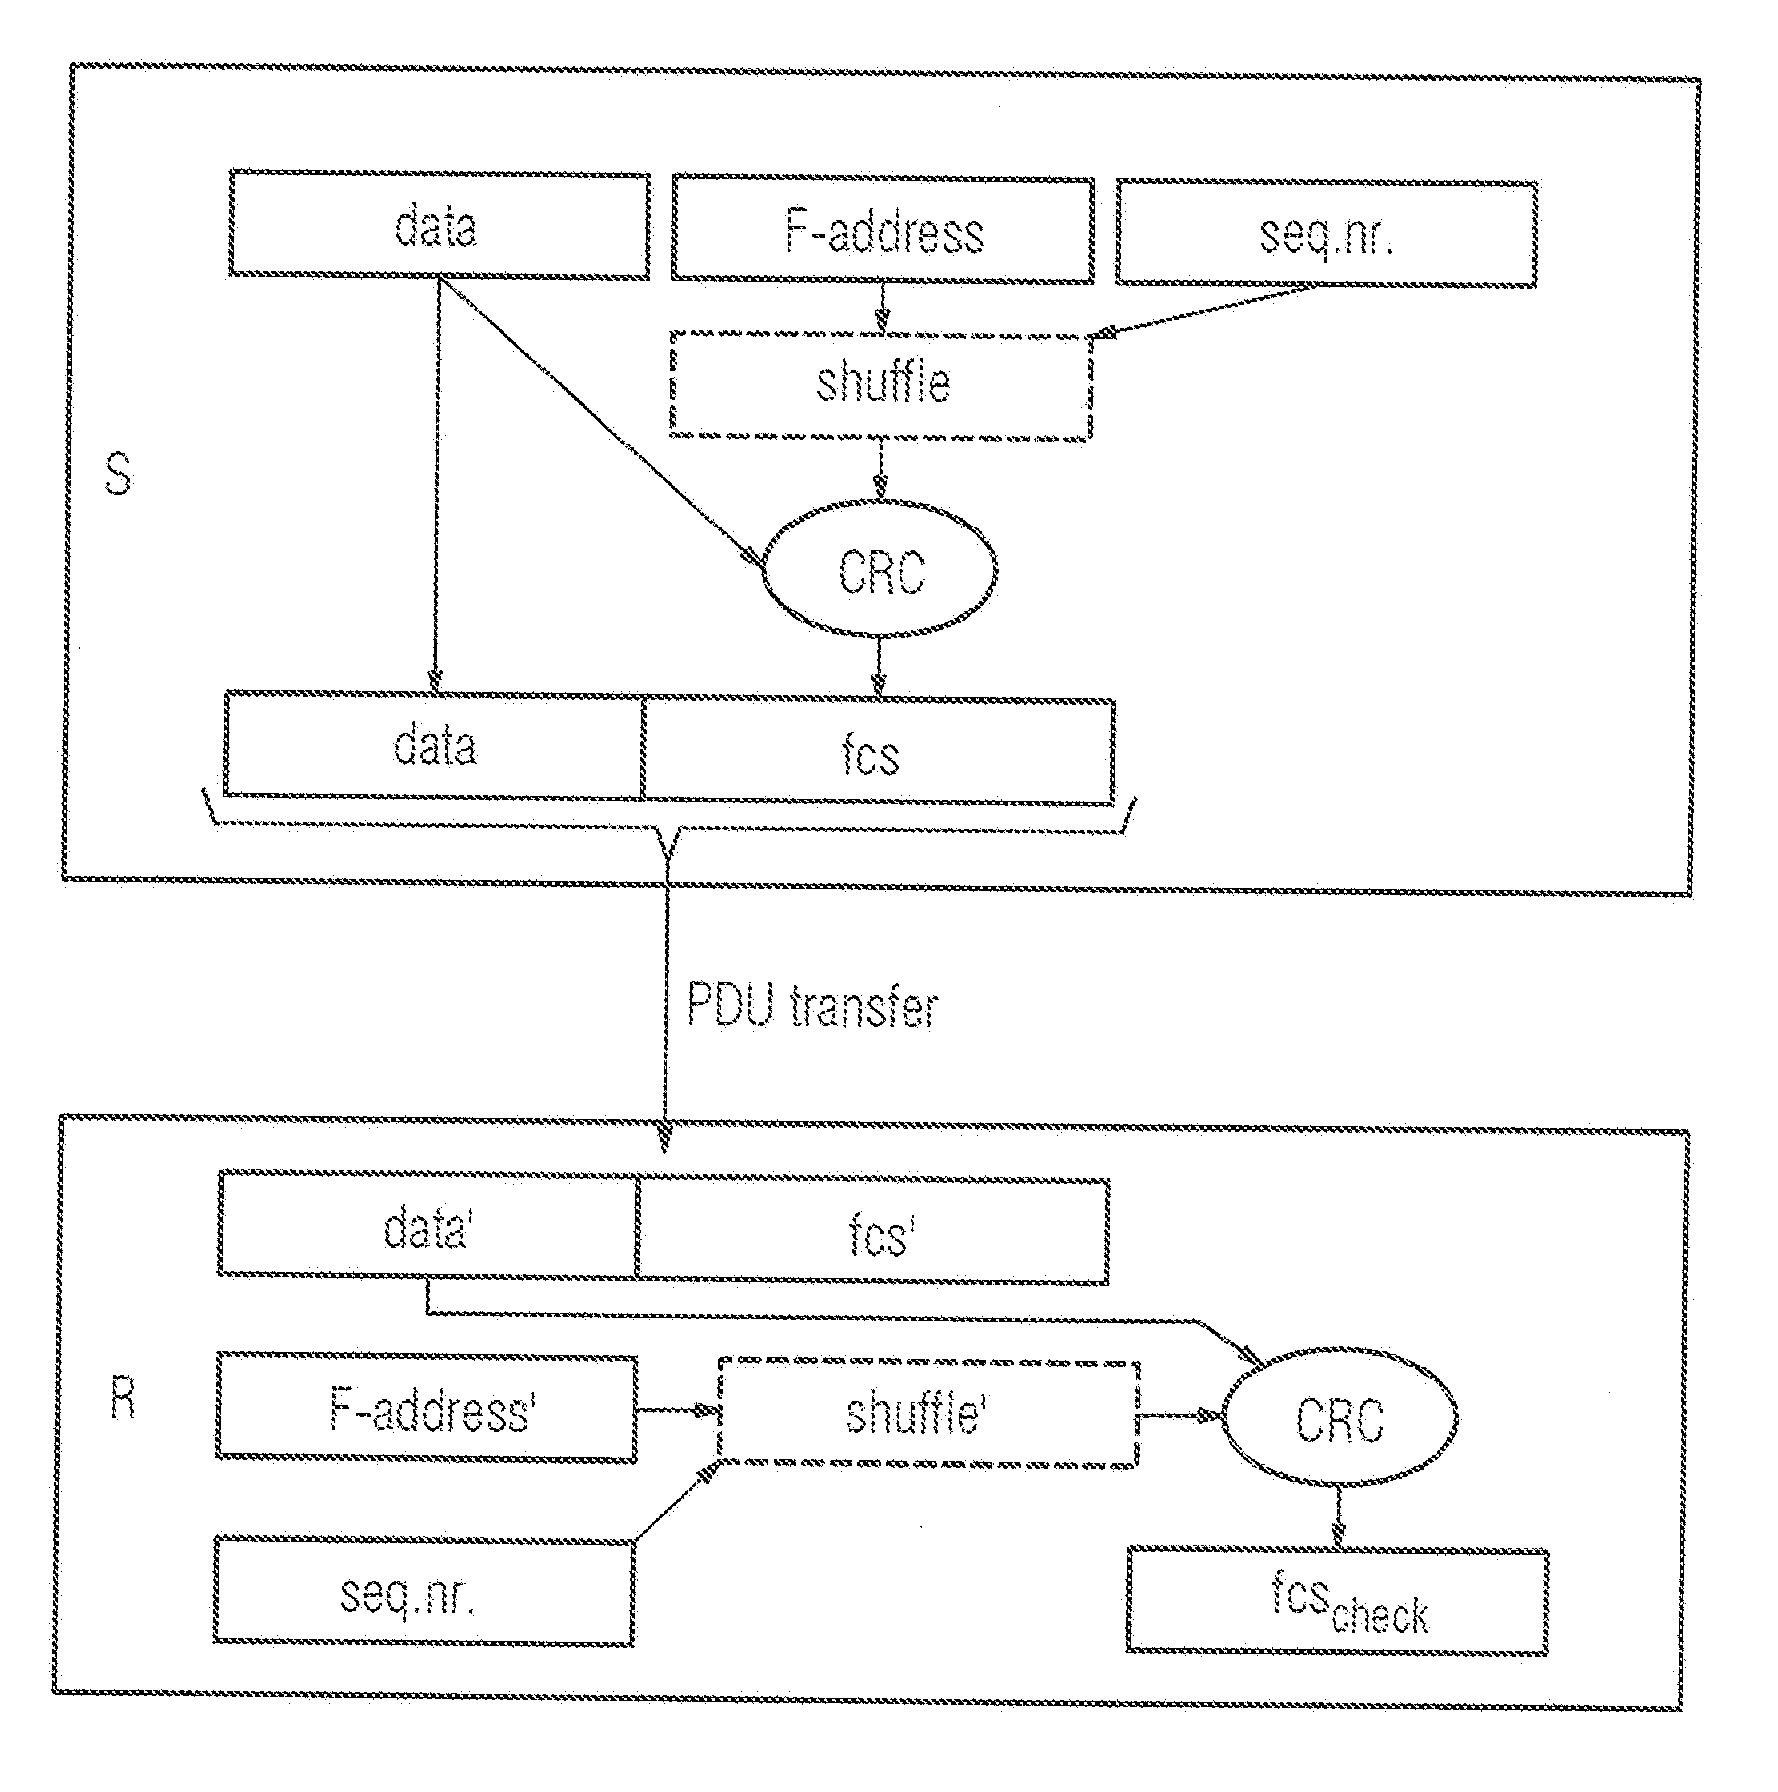 Method and System for Detecting Errors in the Transfer of Data from a Transmitter to At Least One Receiver